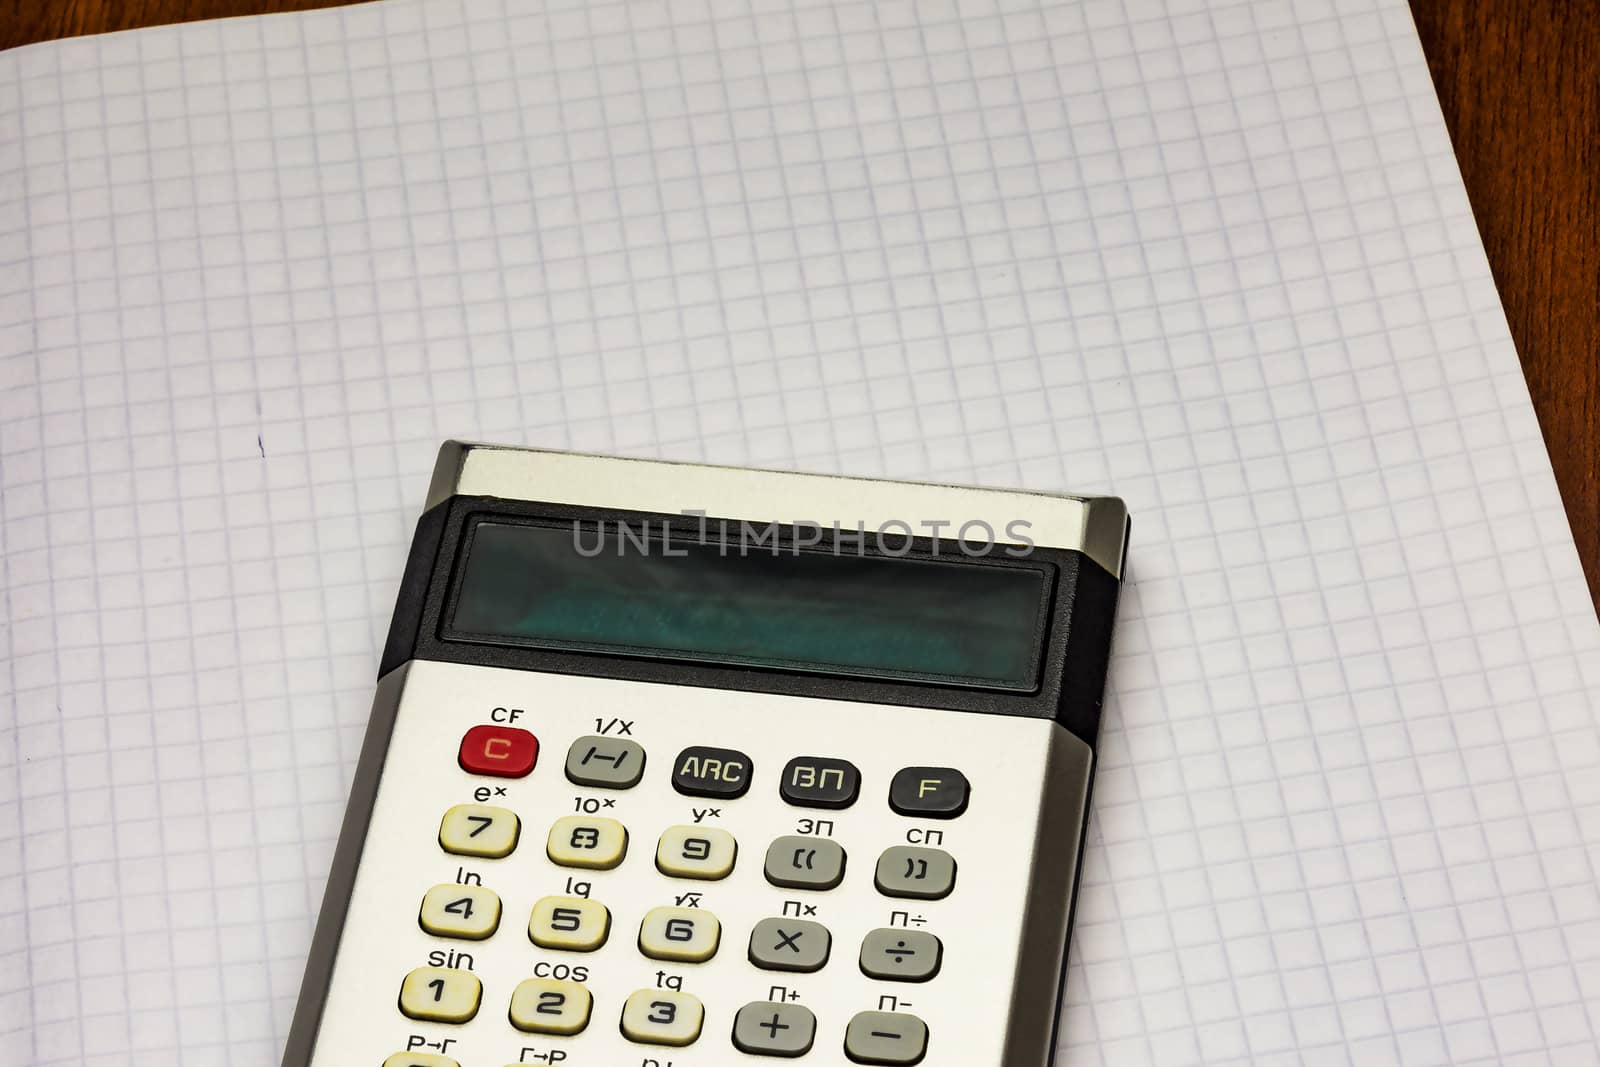 On a sheet of paper in the cage is a calculator by Grommik